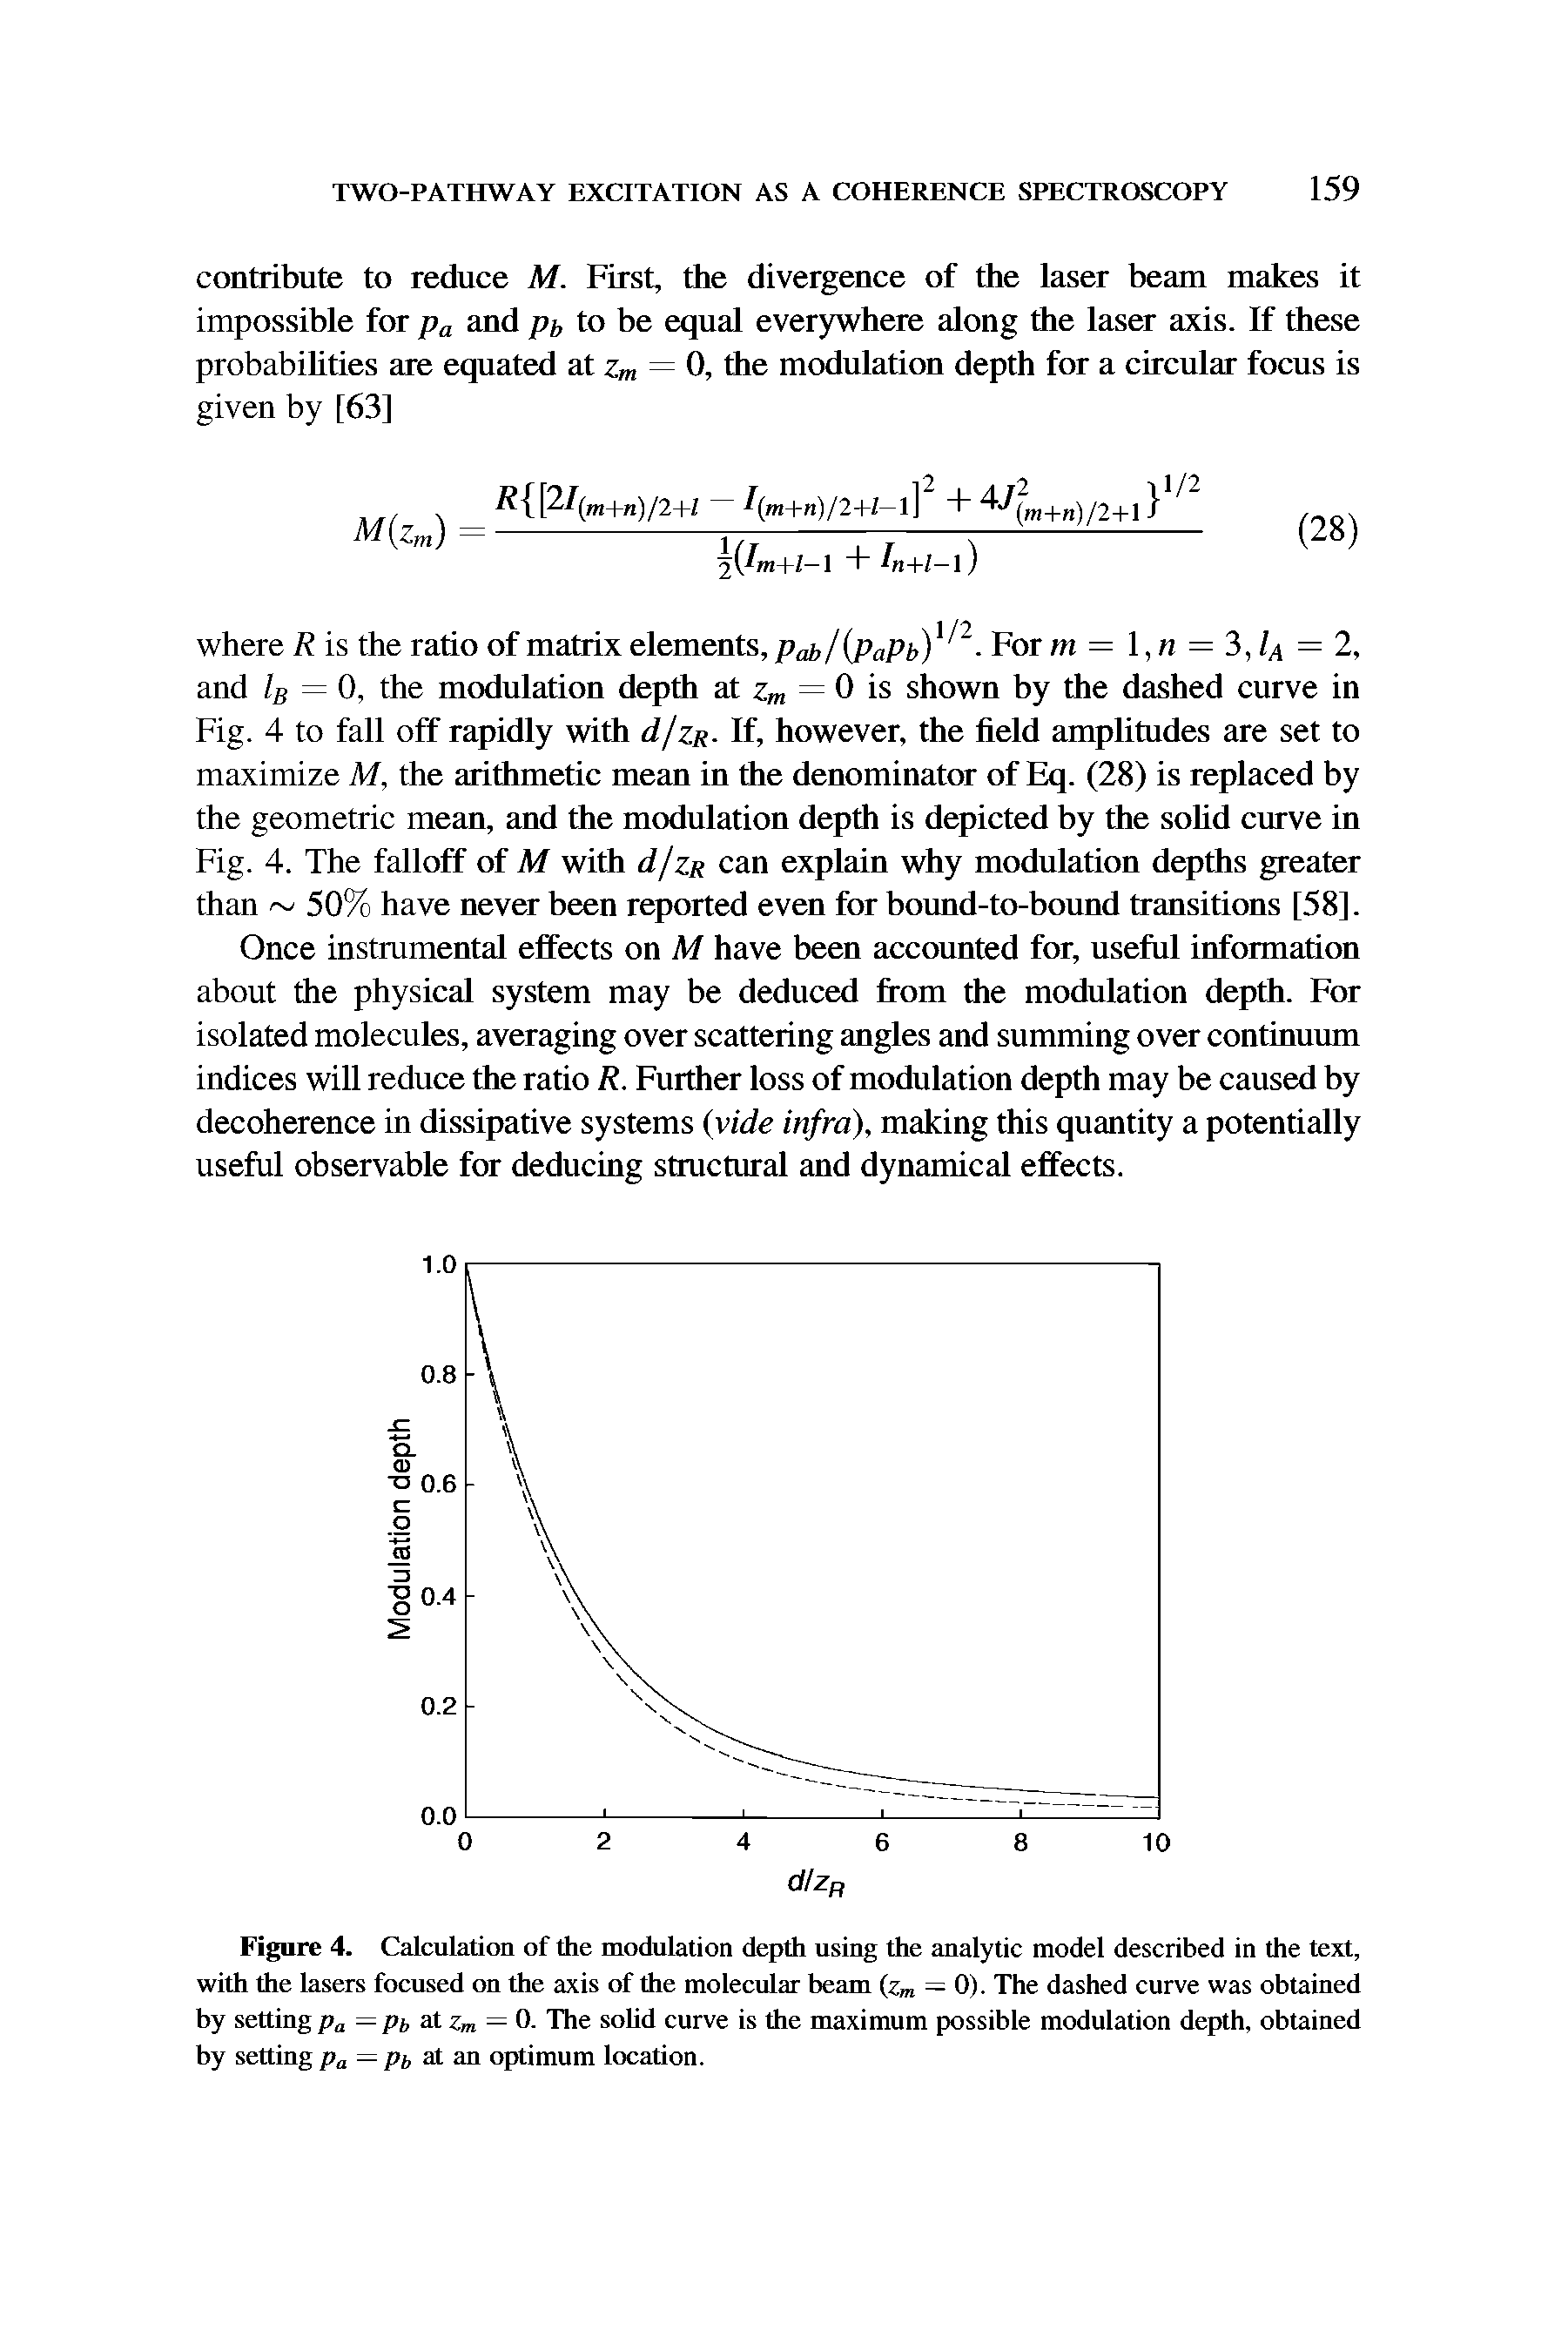 Figure 4. Calculation of the modulation depth using the analytic model described in the text, with the lasers focused on the axis of the molecular beam (zm = 0). The dashed curve was obtained by setting pa — pi, at zm — 0. The solid curve is the maximum possible modulation depth, obtained by setting pa — pt, at an optimum location.